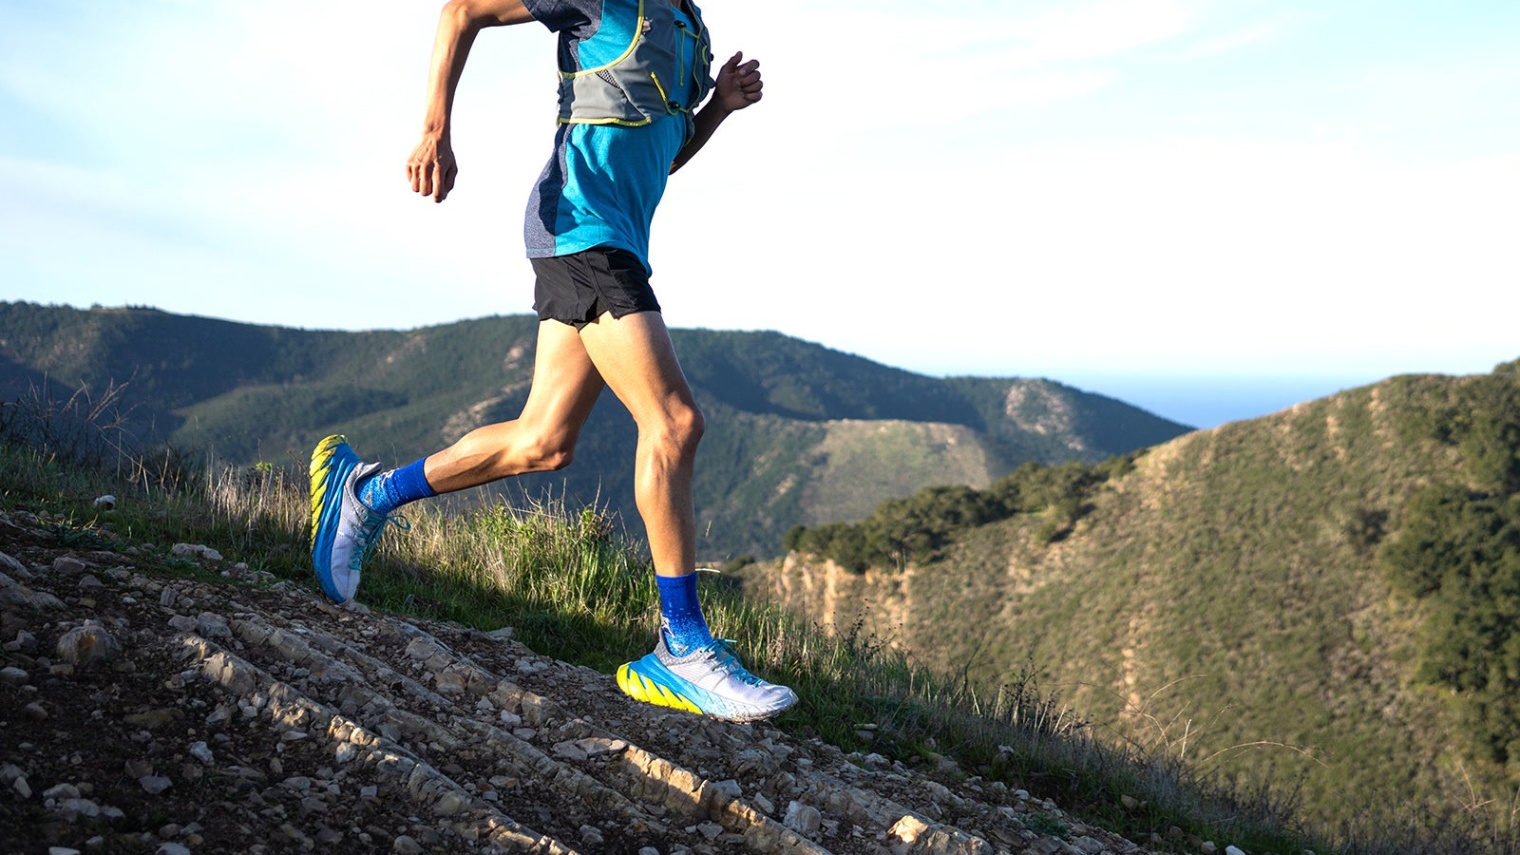 HOKA TRAIL RUNNING SHOES TIPS - DID YOU KNOW?